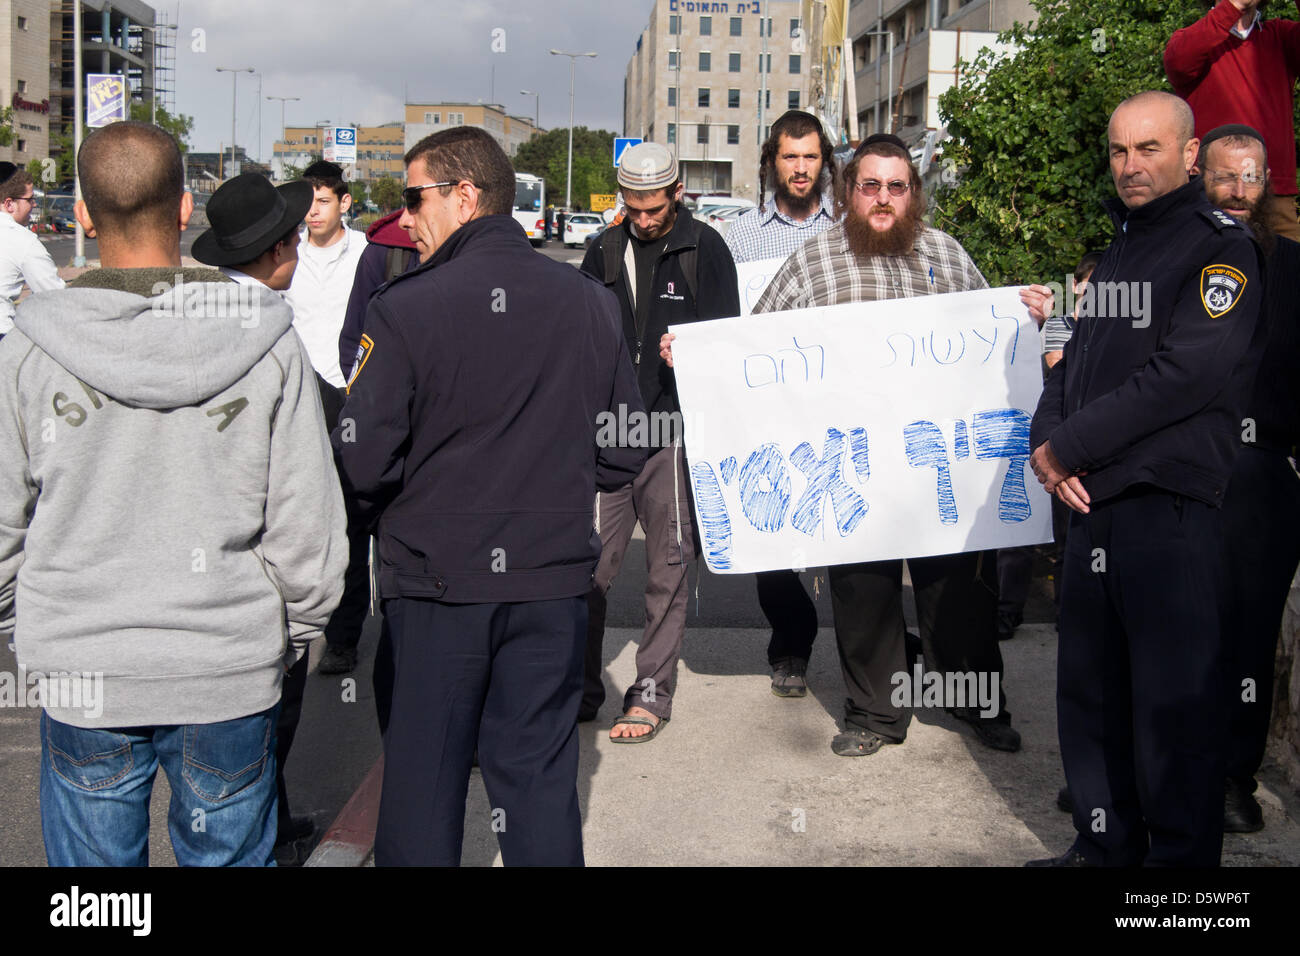 Jerusalem, Israel. 9-Apr-2013. Jewish right-wing activists, lead by Baruch Marzel, disrupt a commemoration procession through the historical village of Deir Yassin, organized by Zochrot (Remembering), seeking to raise public awareness of the Palestinian Nakba (Catastrophe).     Deir Yassin, a pre-1948 Arab village adjacent to Jerusalem with a population of about 600, was invaded by paramilitaries from the Jewish Irgun and Lehi groups on April 9, 1948 and around 115 villagers were massacred. Credit: Nir Alon/Alamy Live News Stock Photo